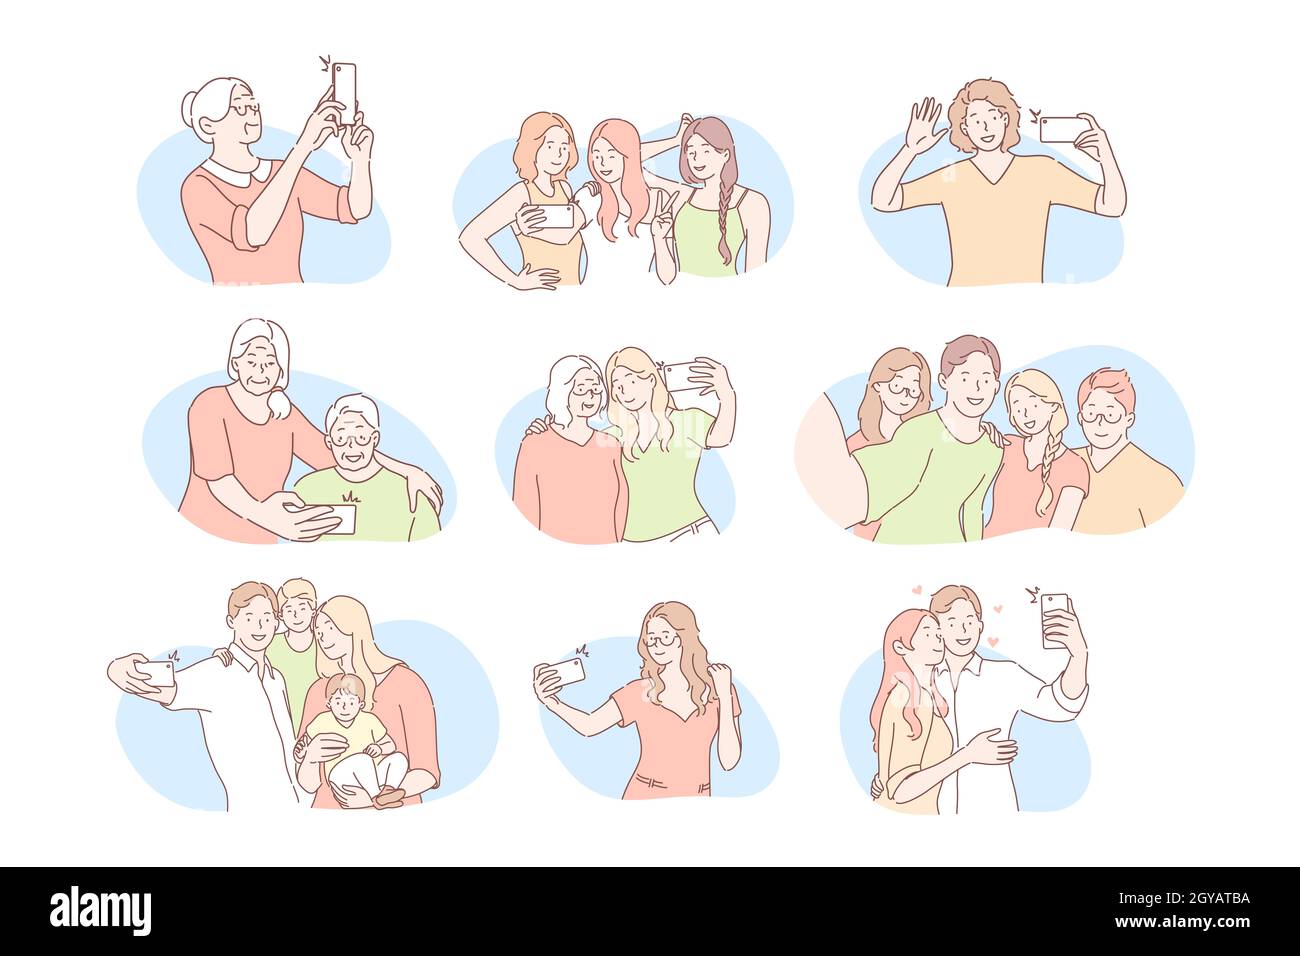 Social media communication, selfie set concept. Collection of young and elder men and women taking selfie using mobile phones. Groups of people make p Stock Photo